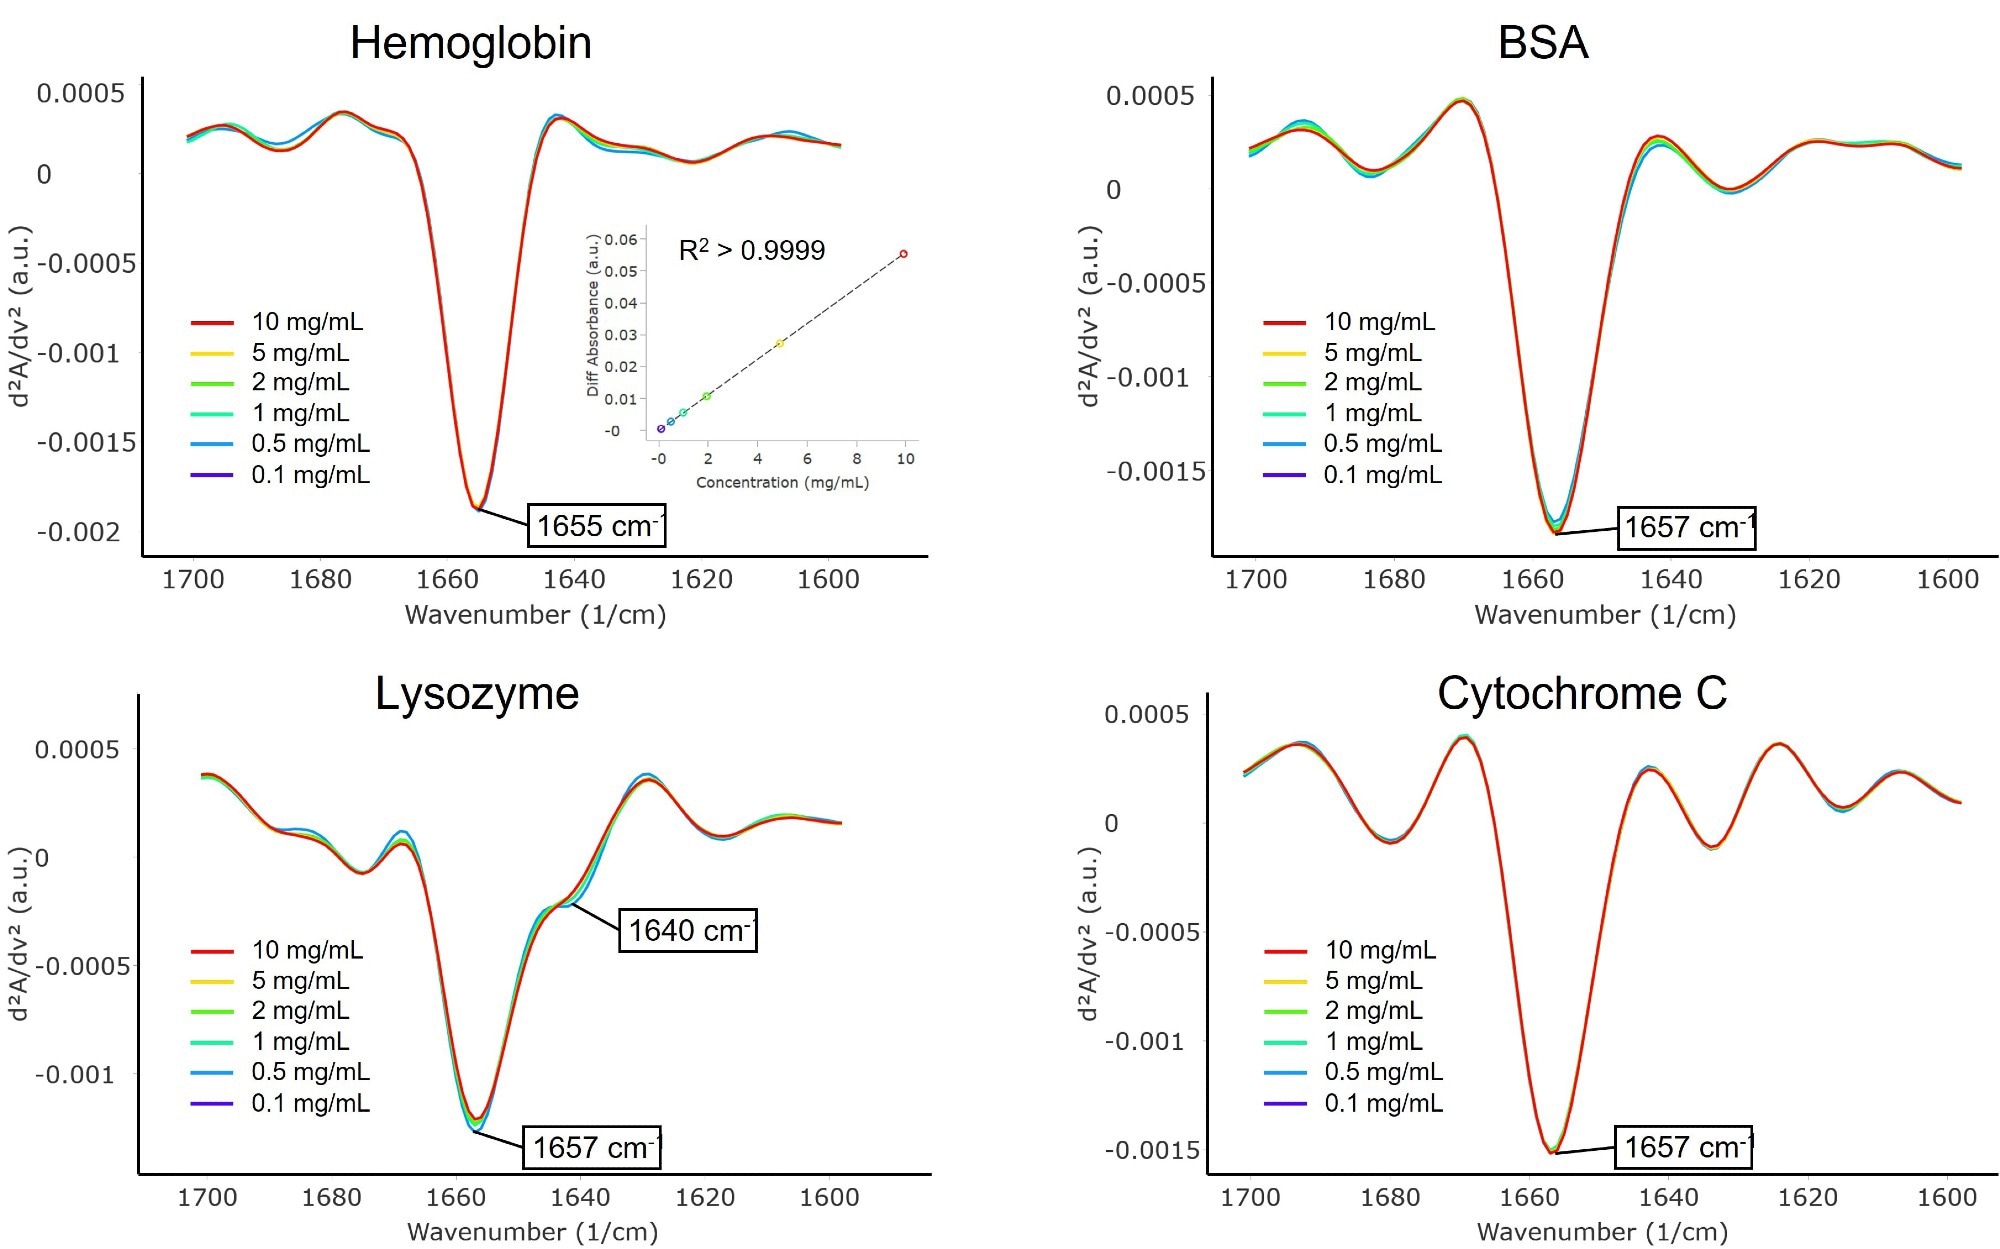 Second derivative spectra of α-helix-rich proteins: hemoglobin, BSA, lysozyme, and cytochrome C. Inset in the hemoglobin spectra shows the quantitation linearity of the concentrations measured, from 0.1 to 10 mg/mL.